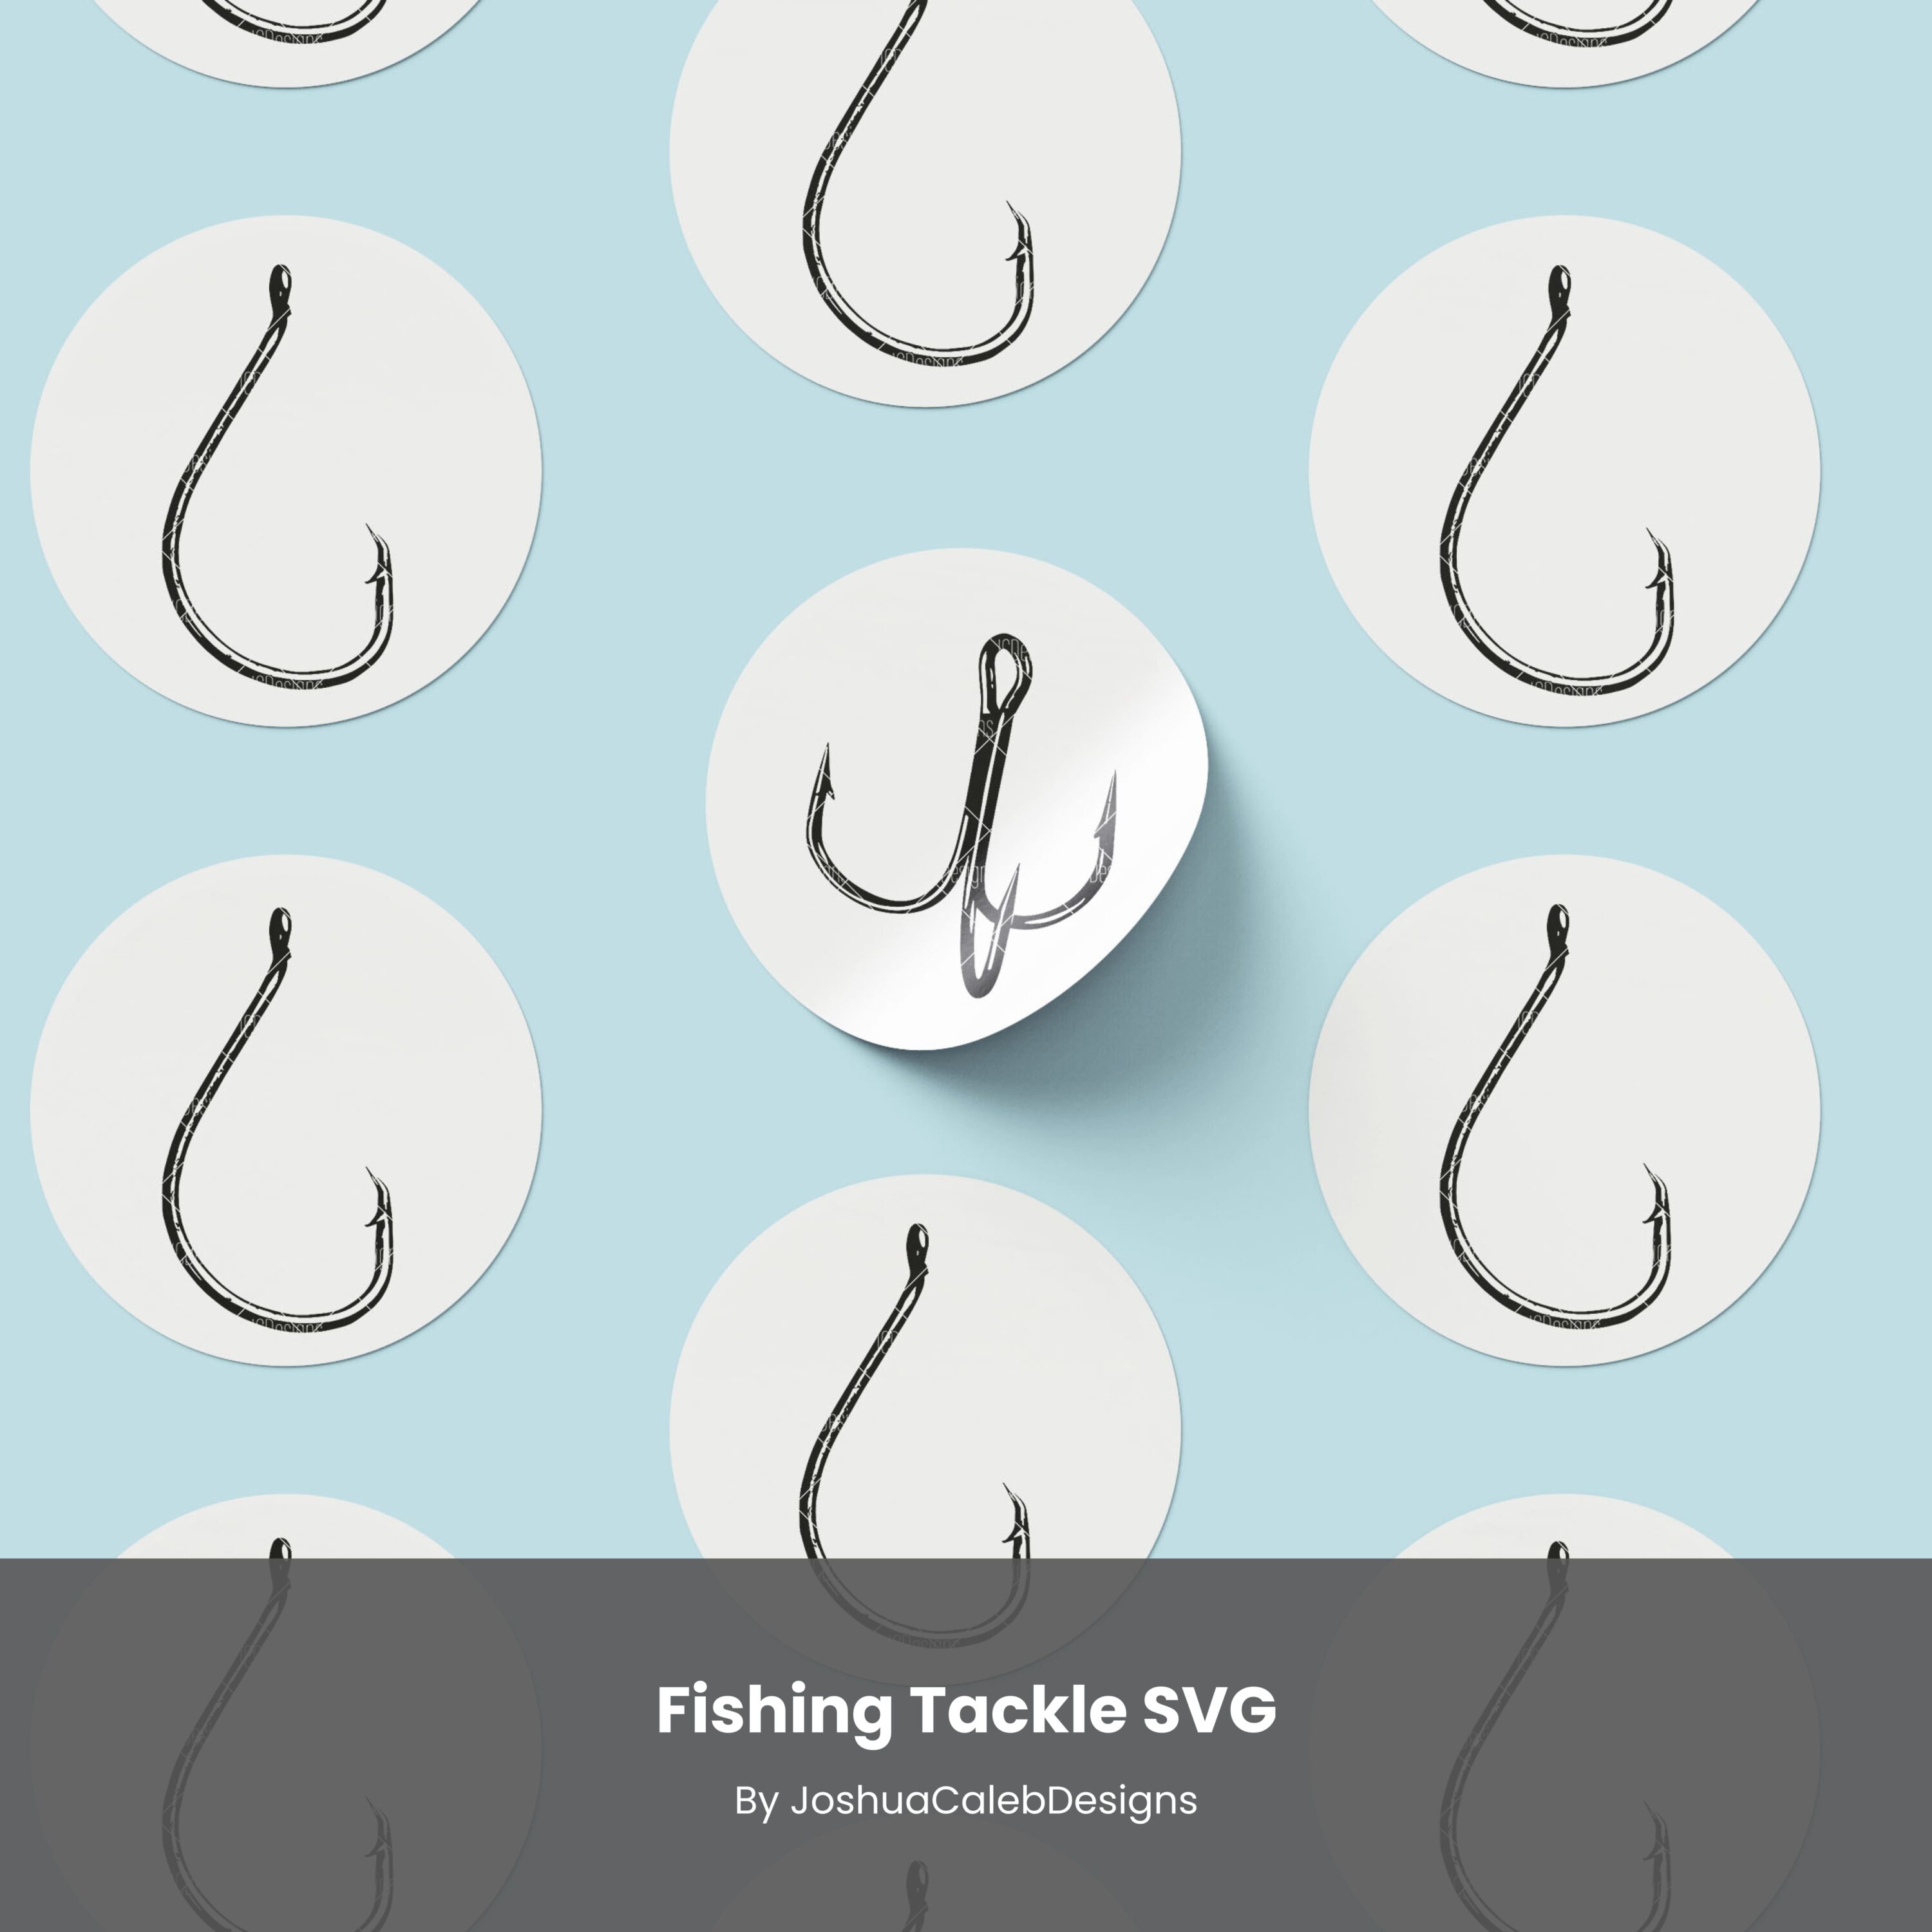 Fishing Tackle SVG - Fish Hooks Svg cover.